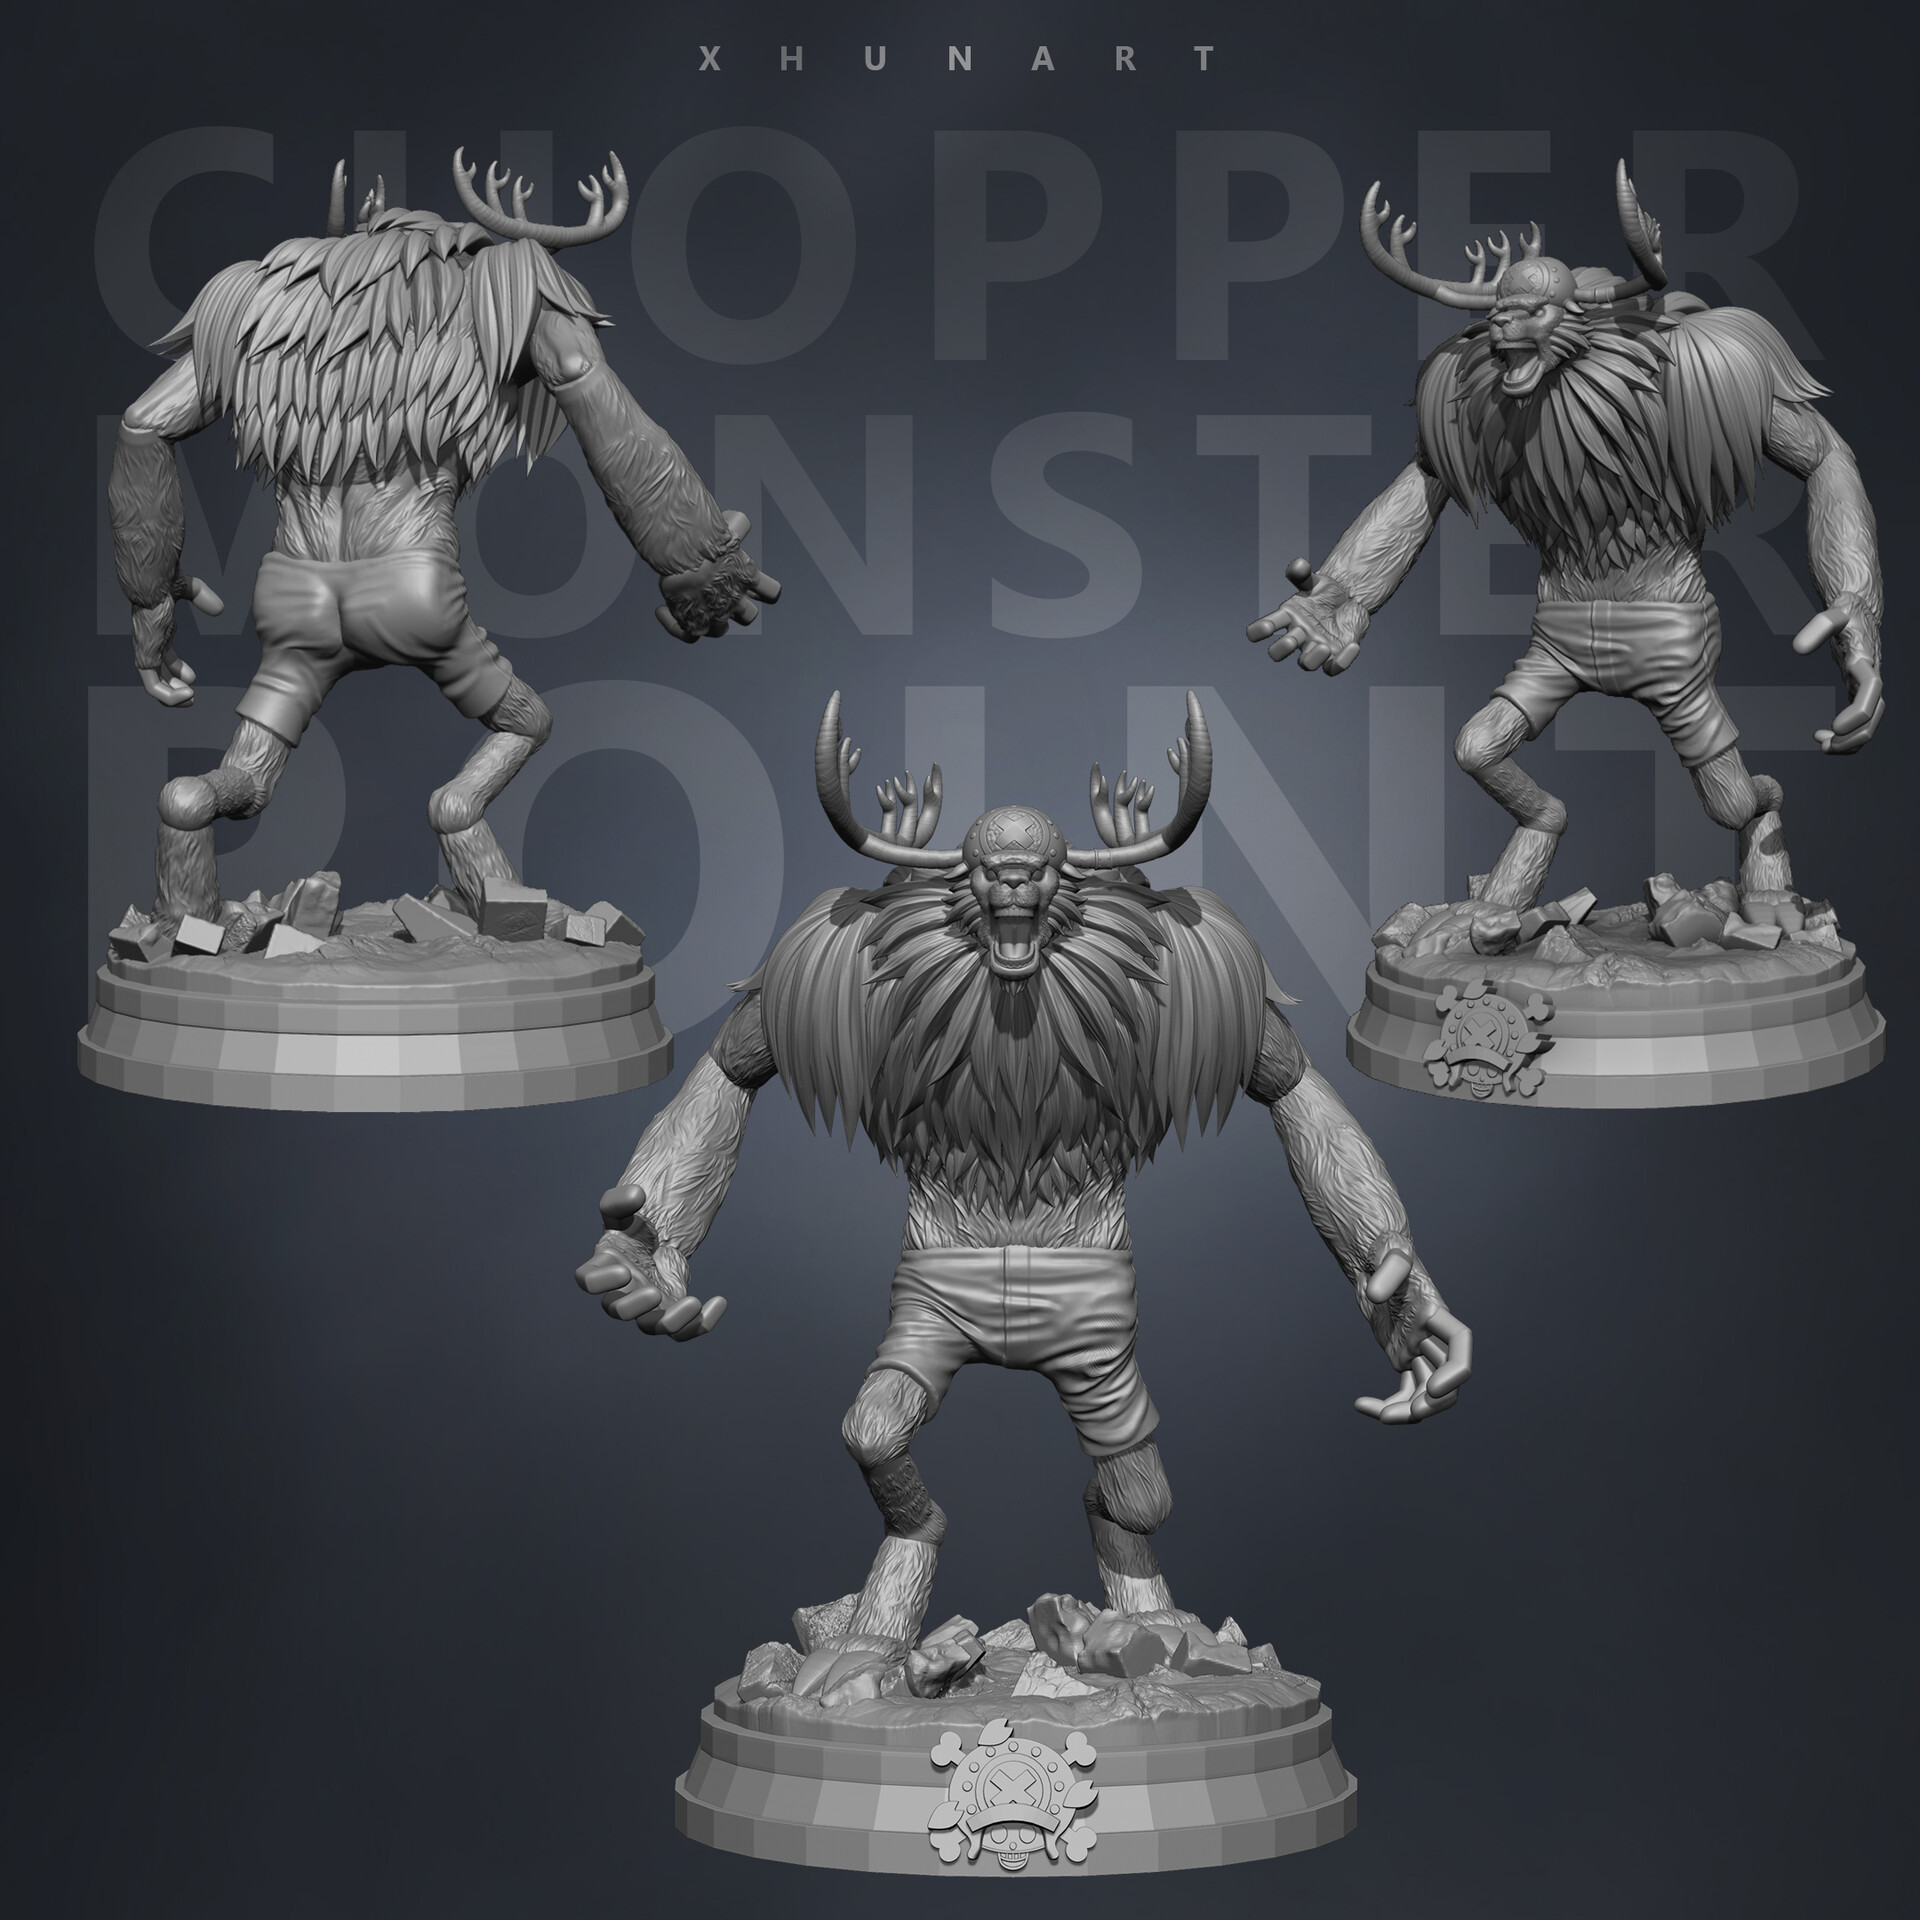 XhunArt - Here's our Chopper monster point statue work in